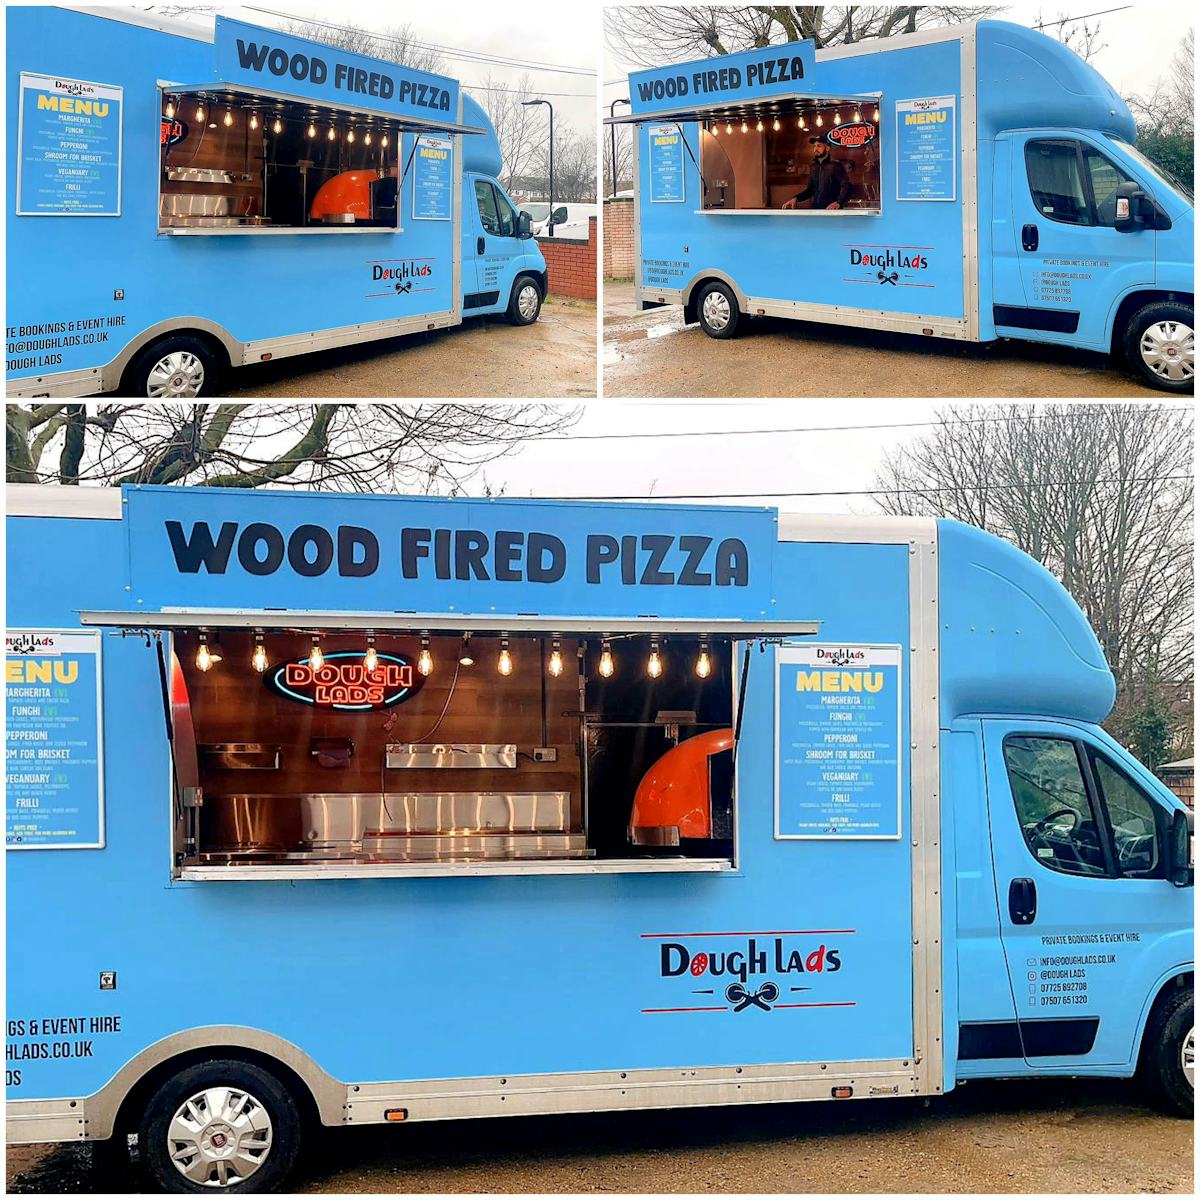 Doughlads Woodfired Pizza